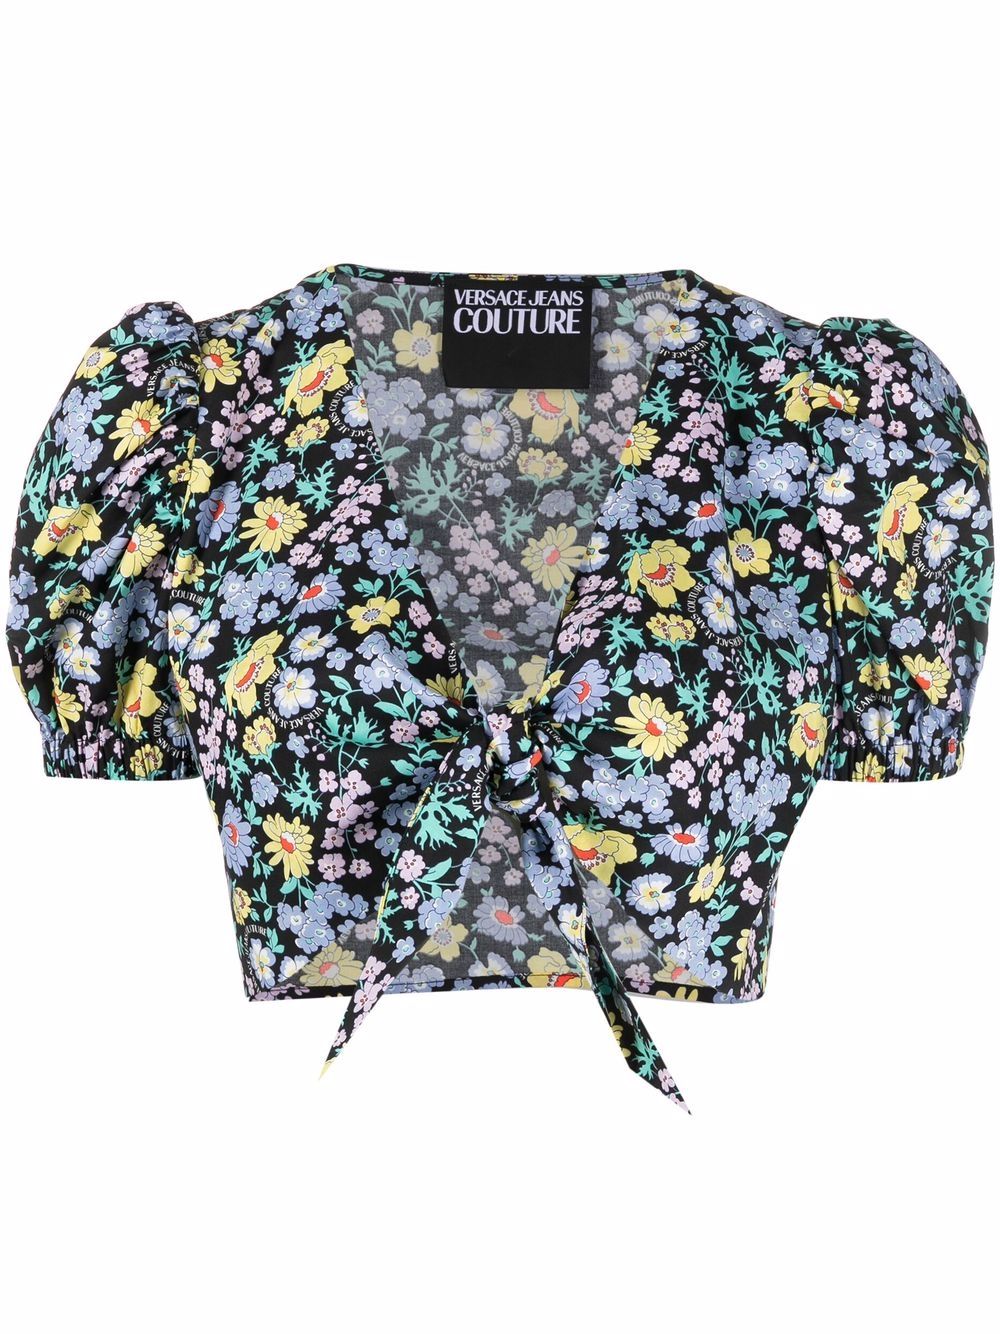 Versace Jeans Couture black & yellow floral-print crop top for women ...